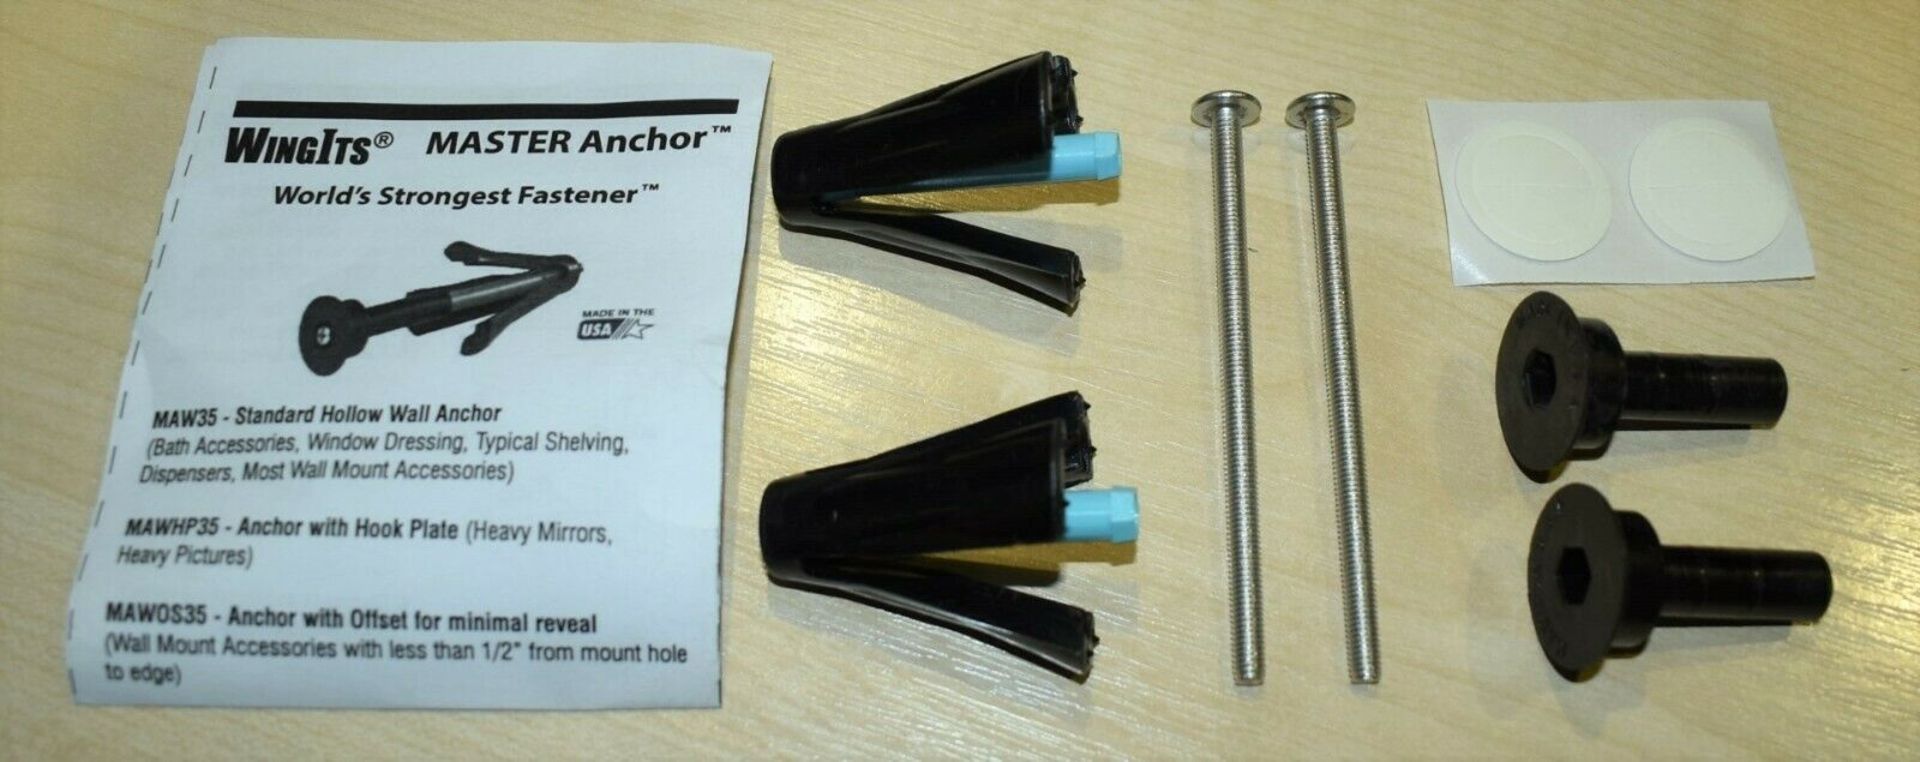 400 x Packs of WingIts Master Anchor Super Duty With Offset Drywall Fasteners - Brand New Stock - - Image 2 of 5